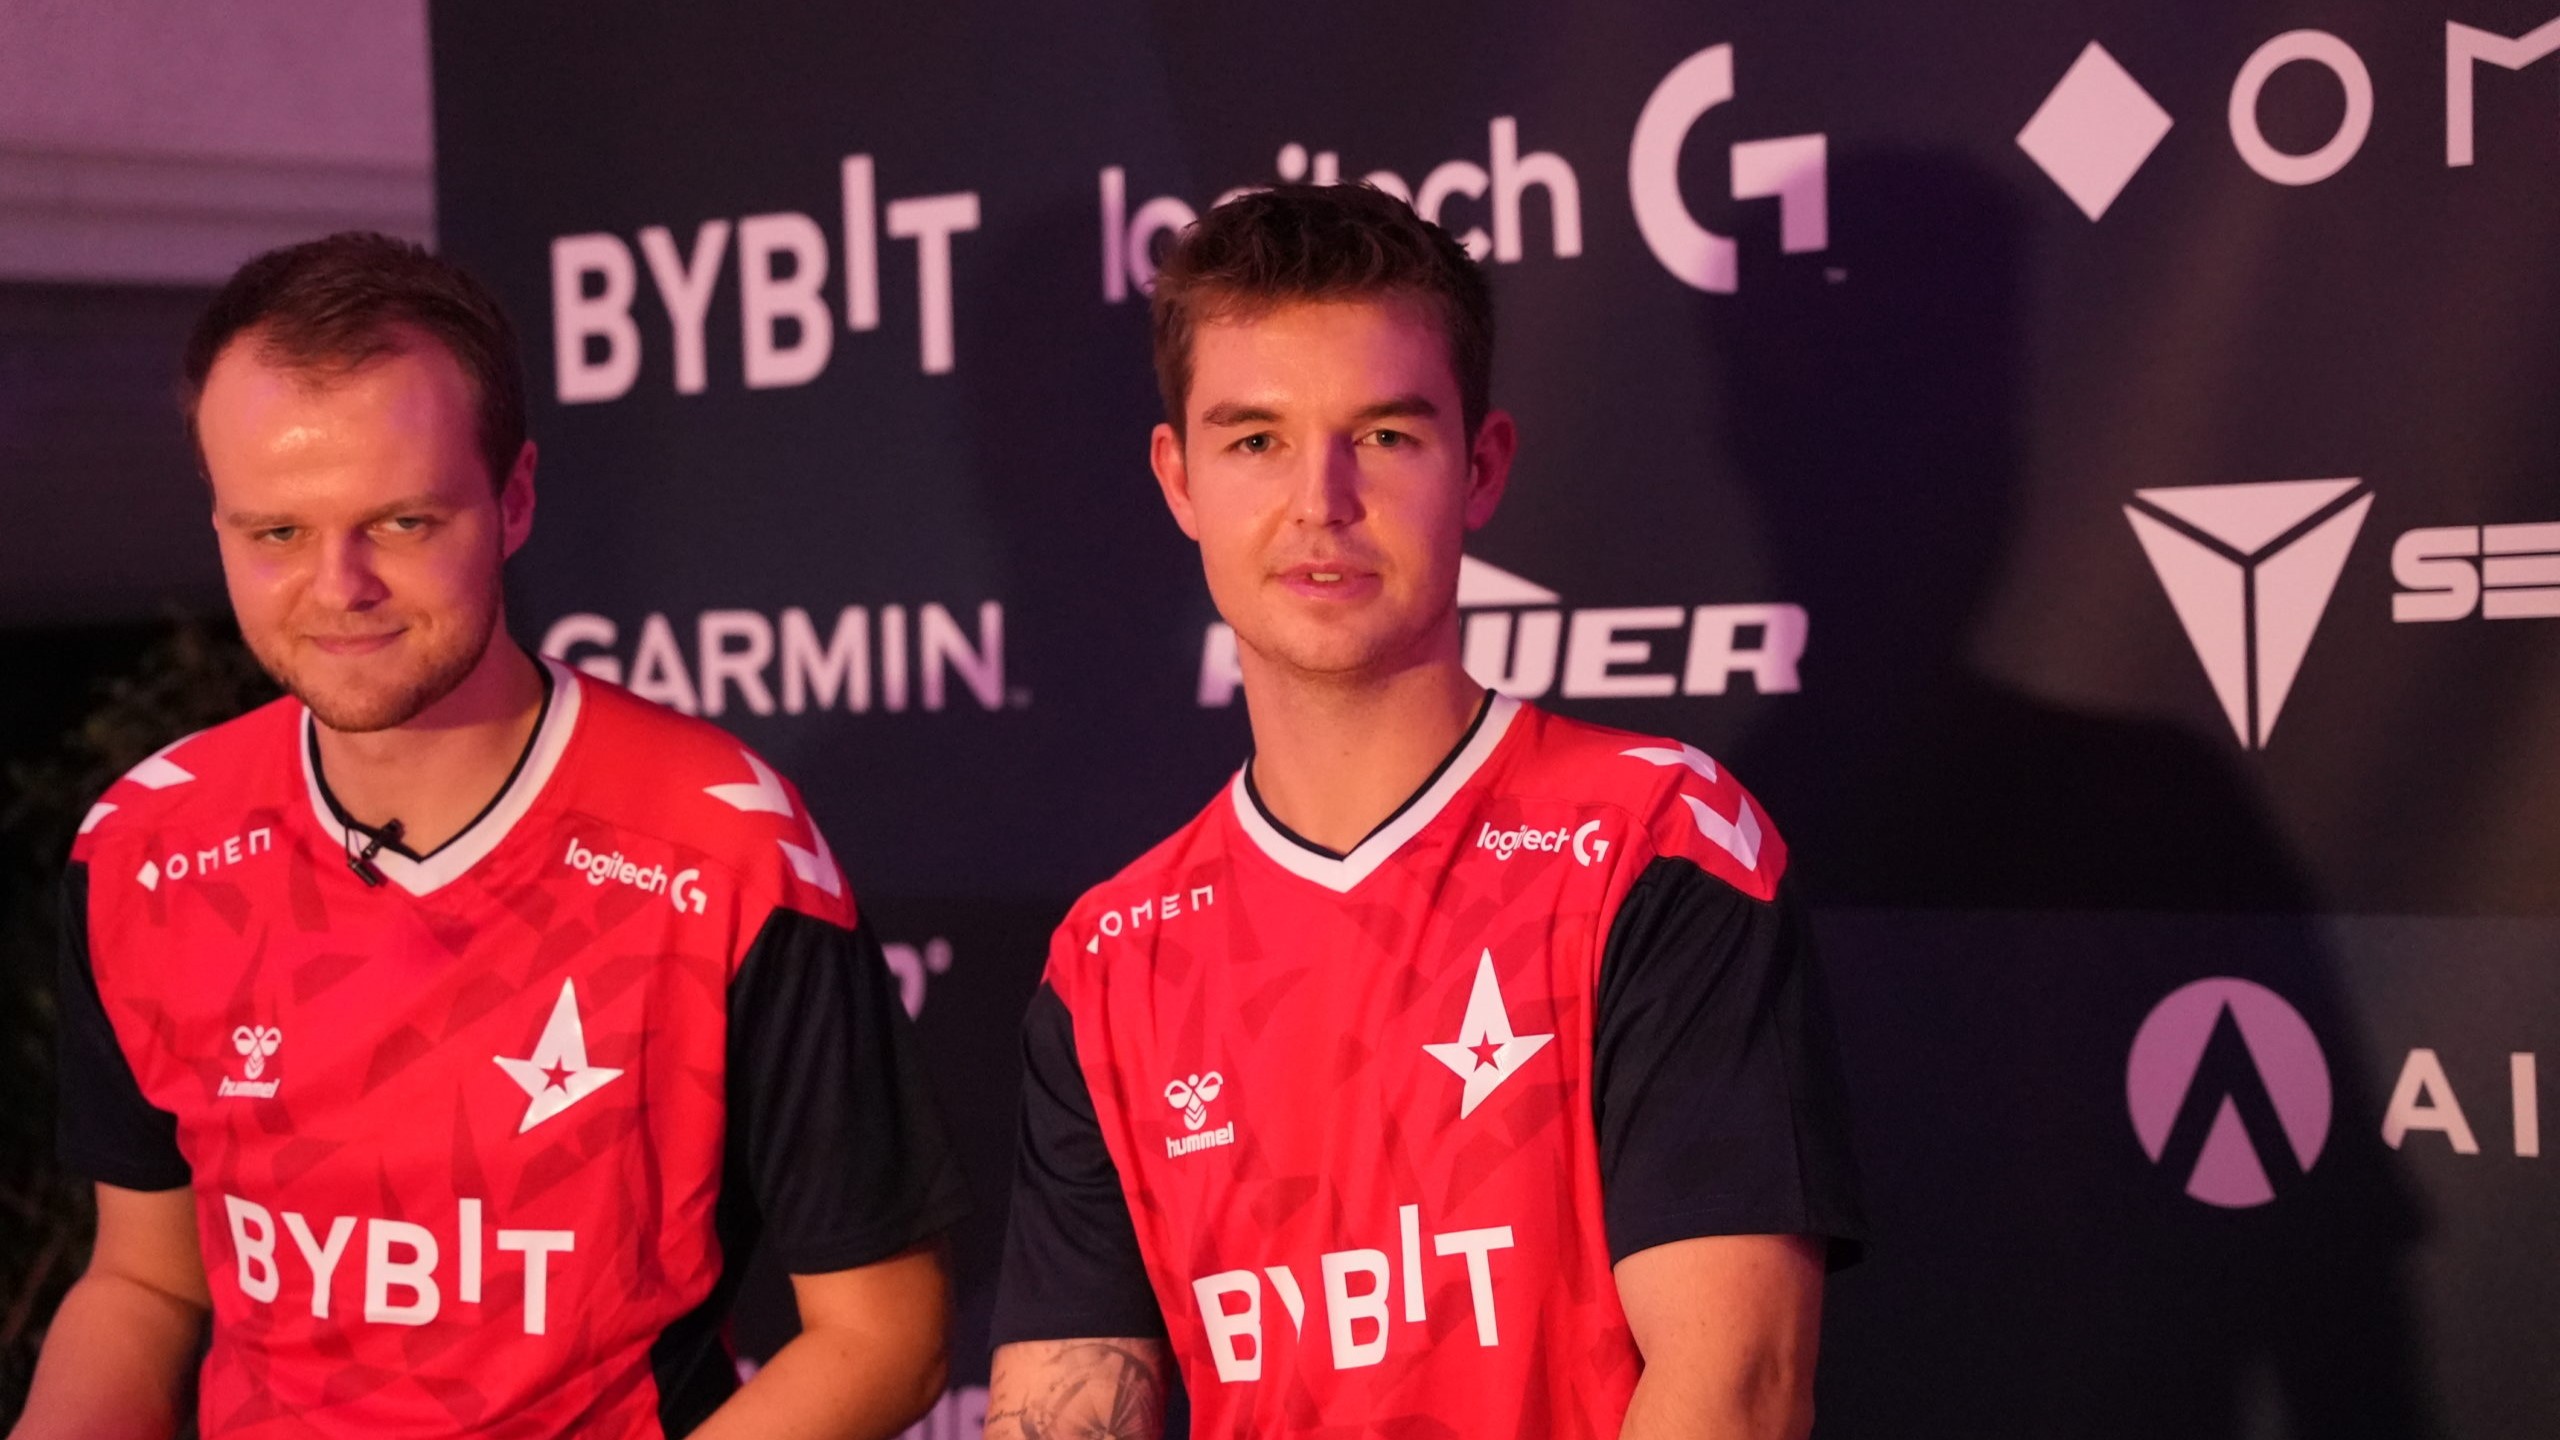 HLTV.org - Member of the current Astralis lineup has